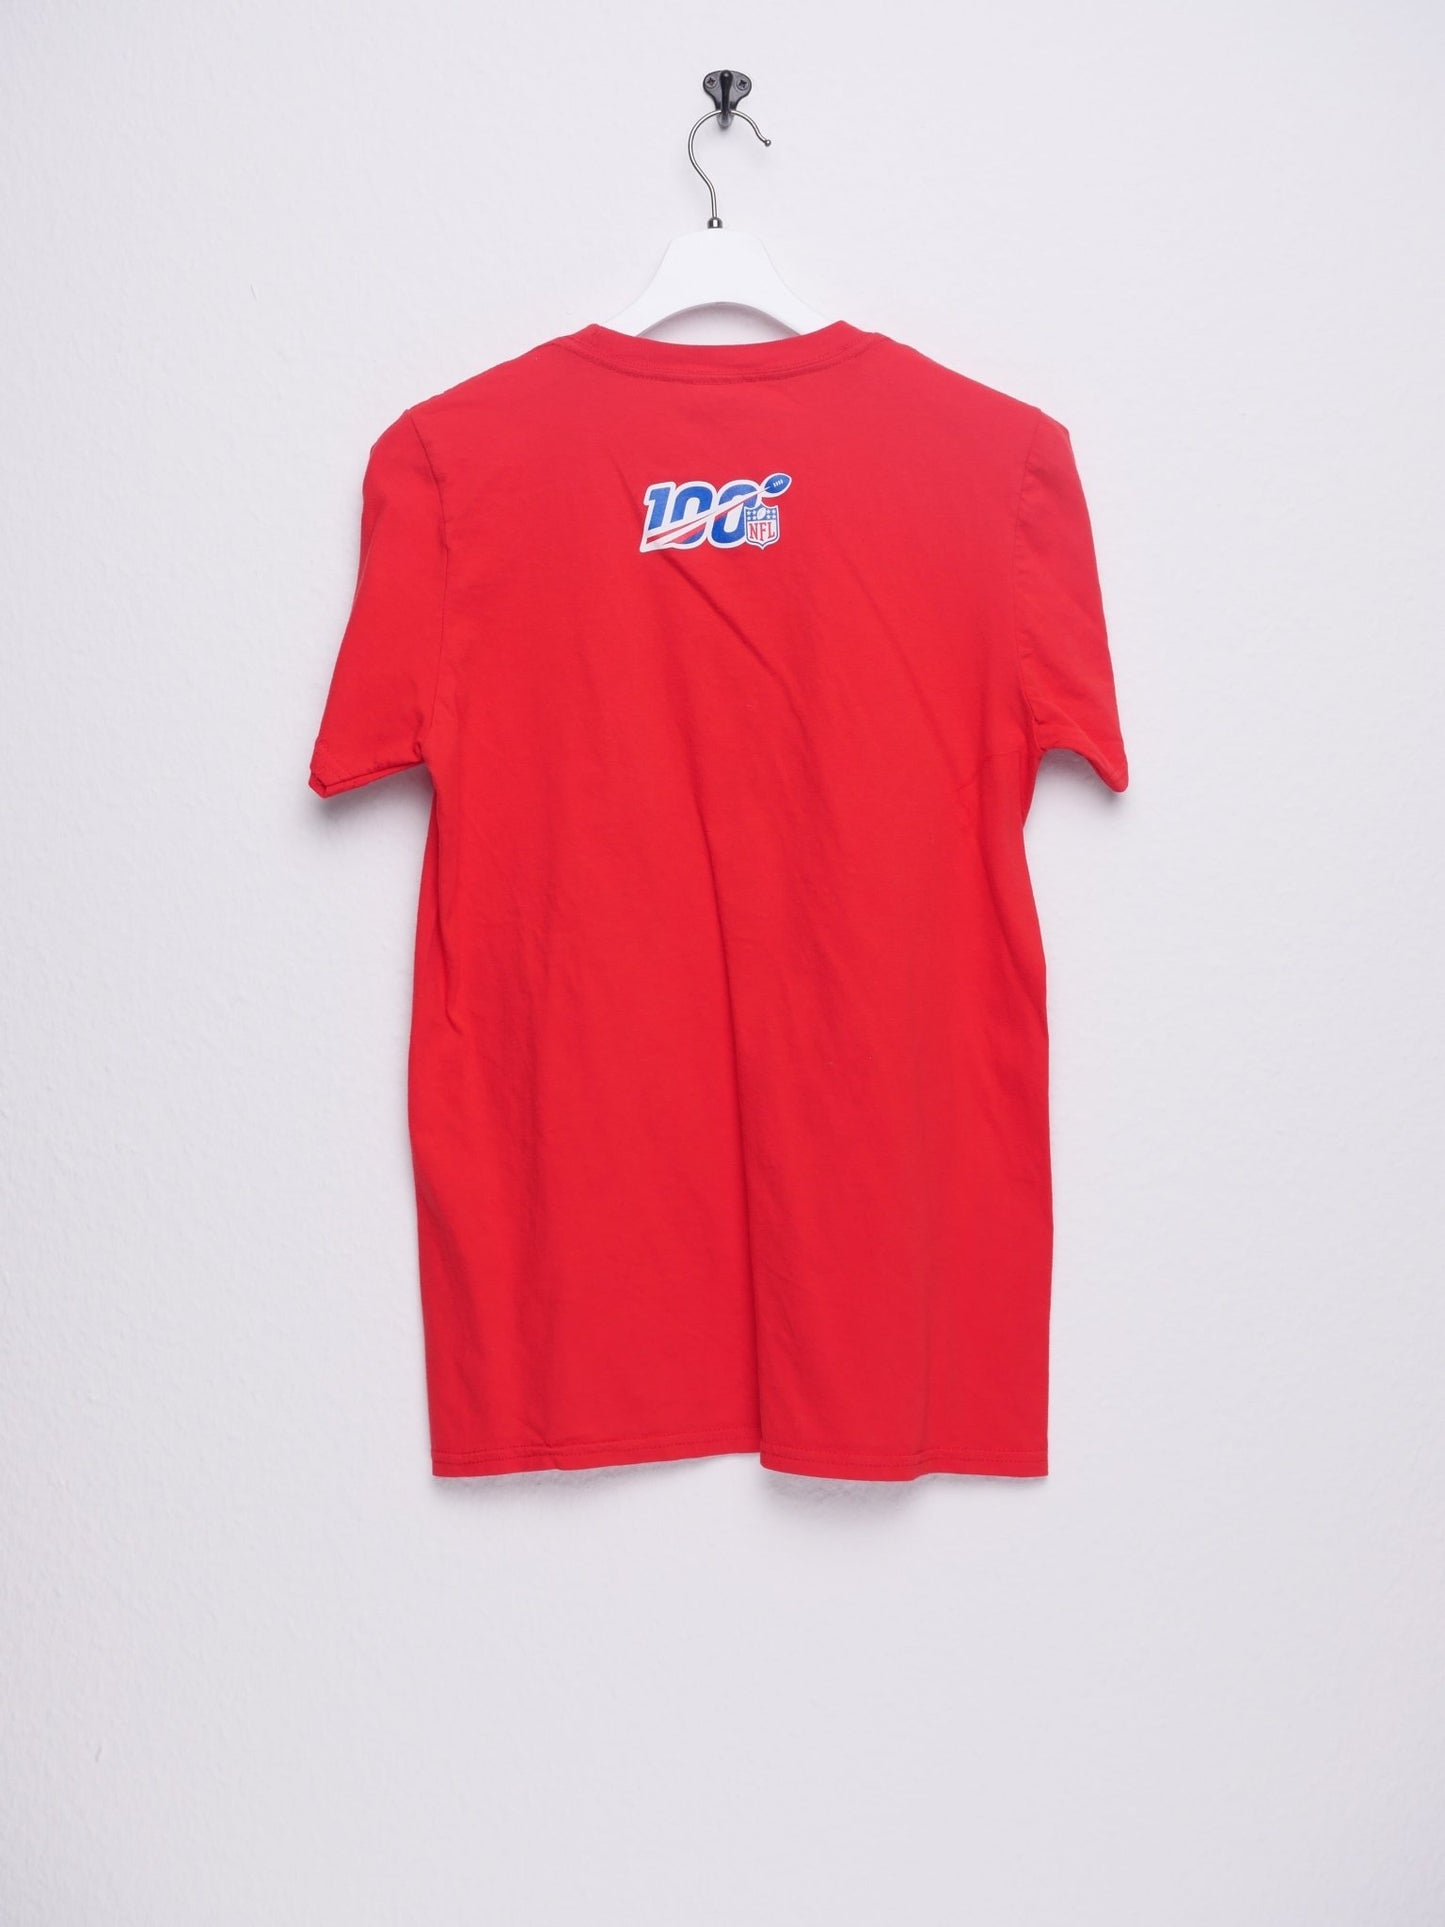 nfl printed Graphic red Shirt - Peeces